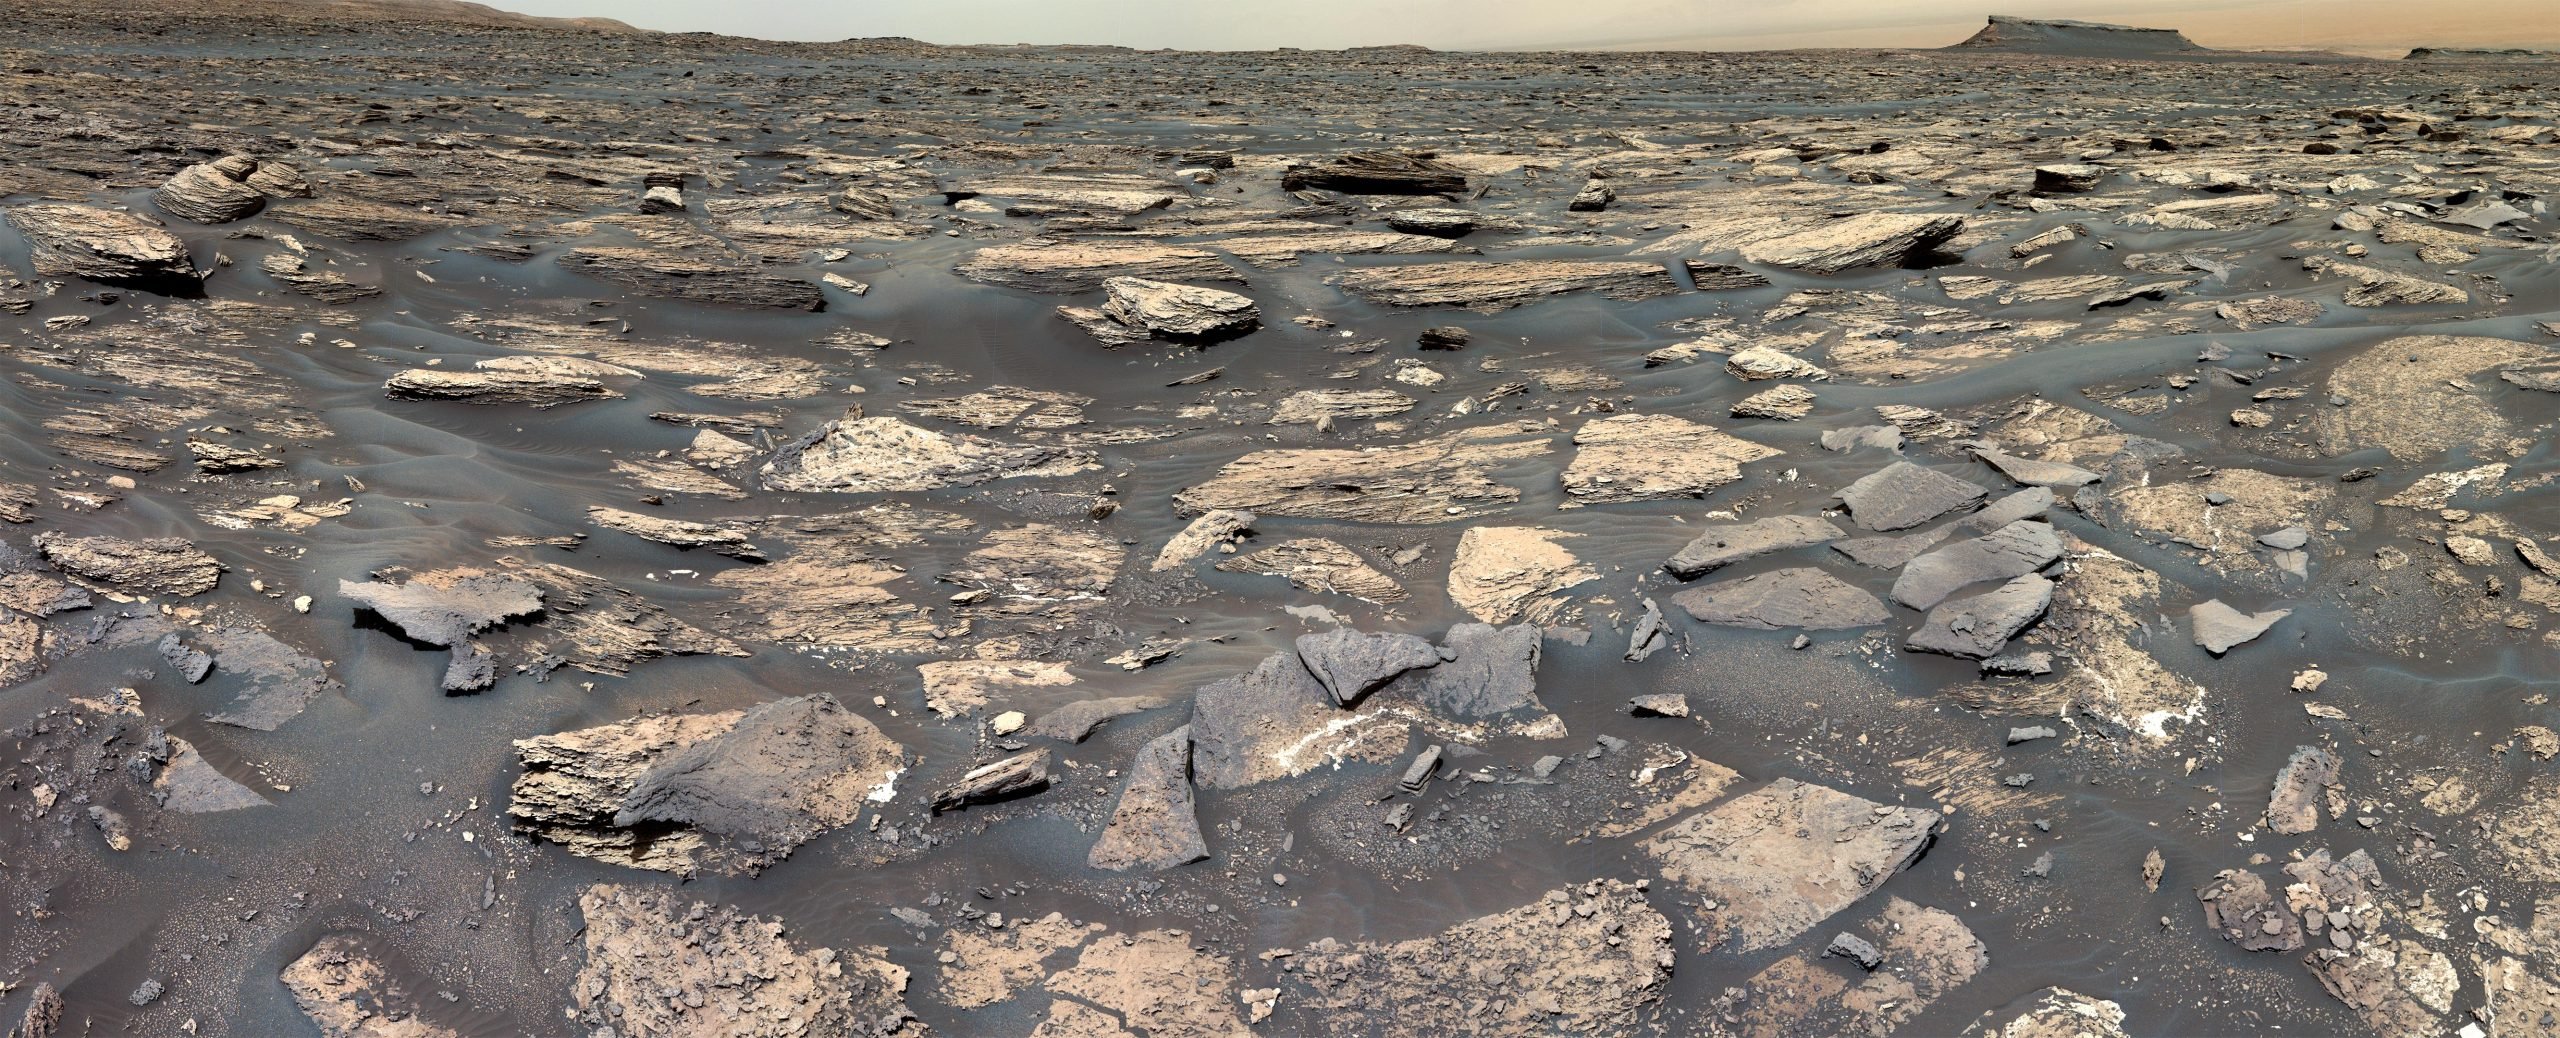 NASA-Curiosity-Mars-Rover-Searches-Gale-Crater-scaled.jpg